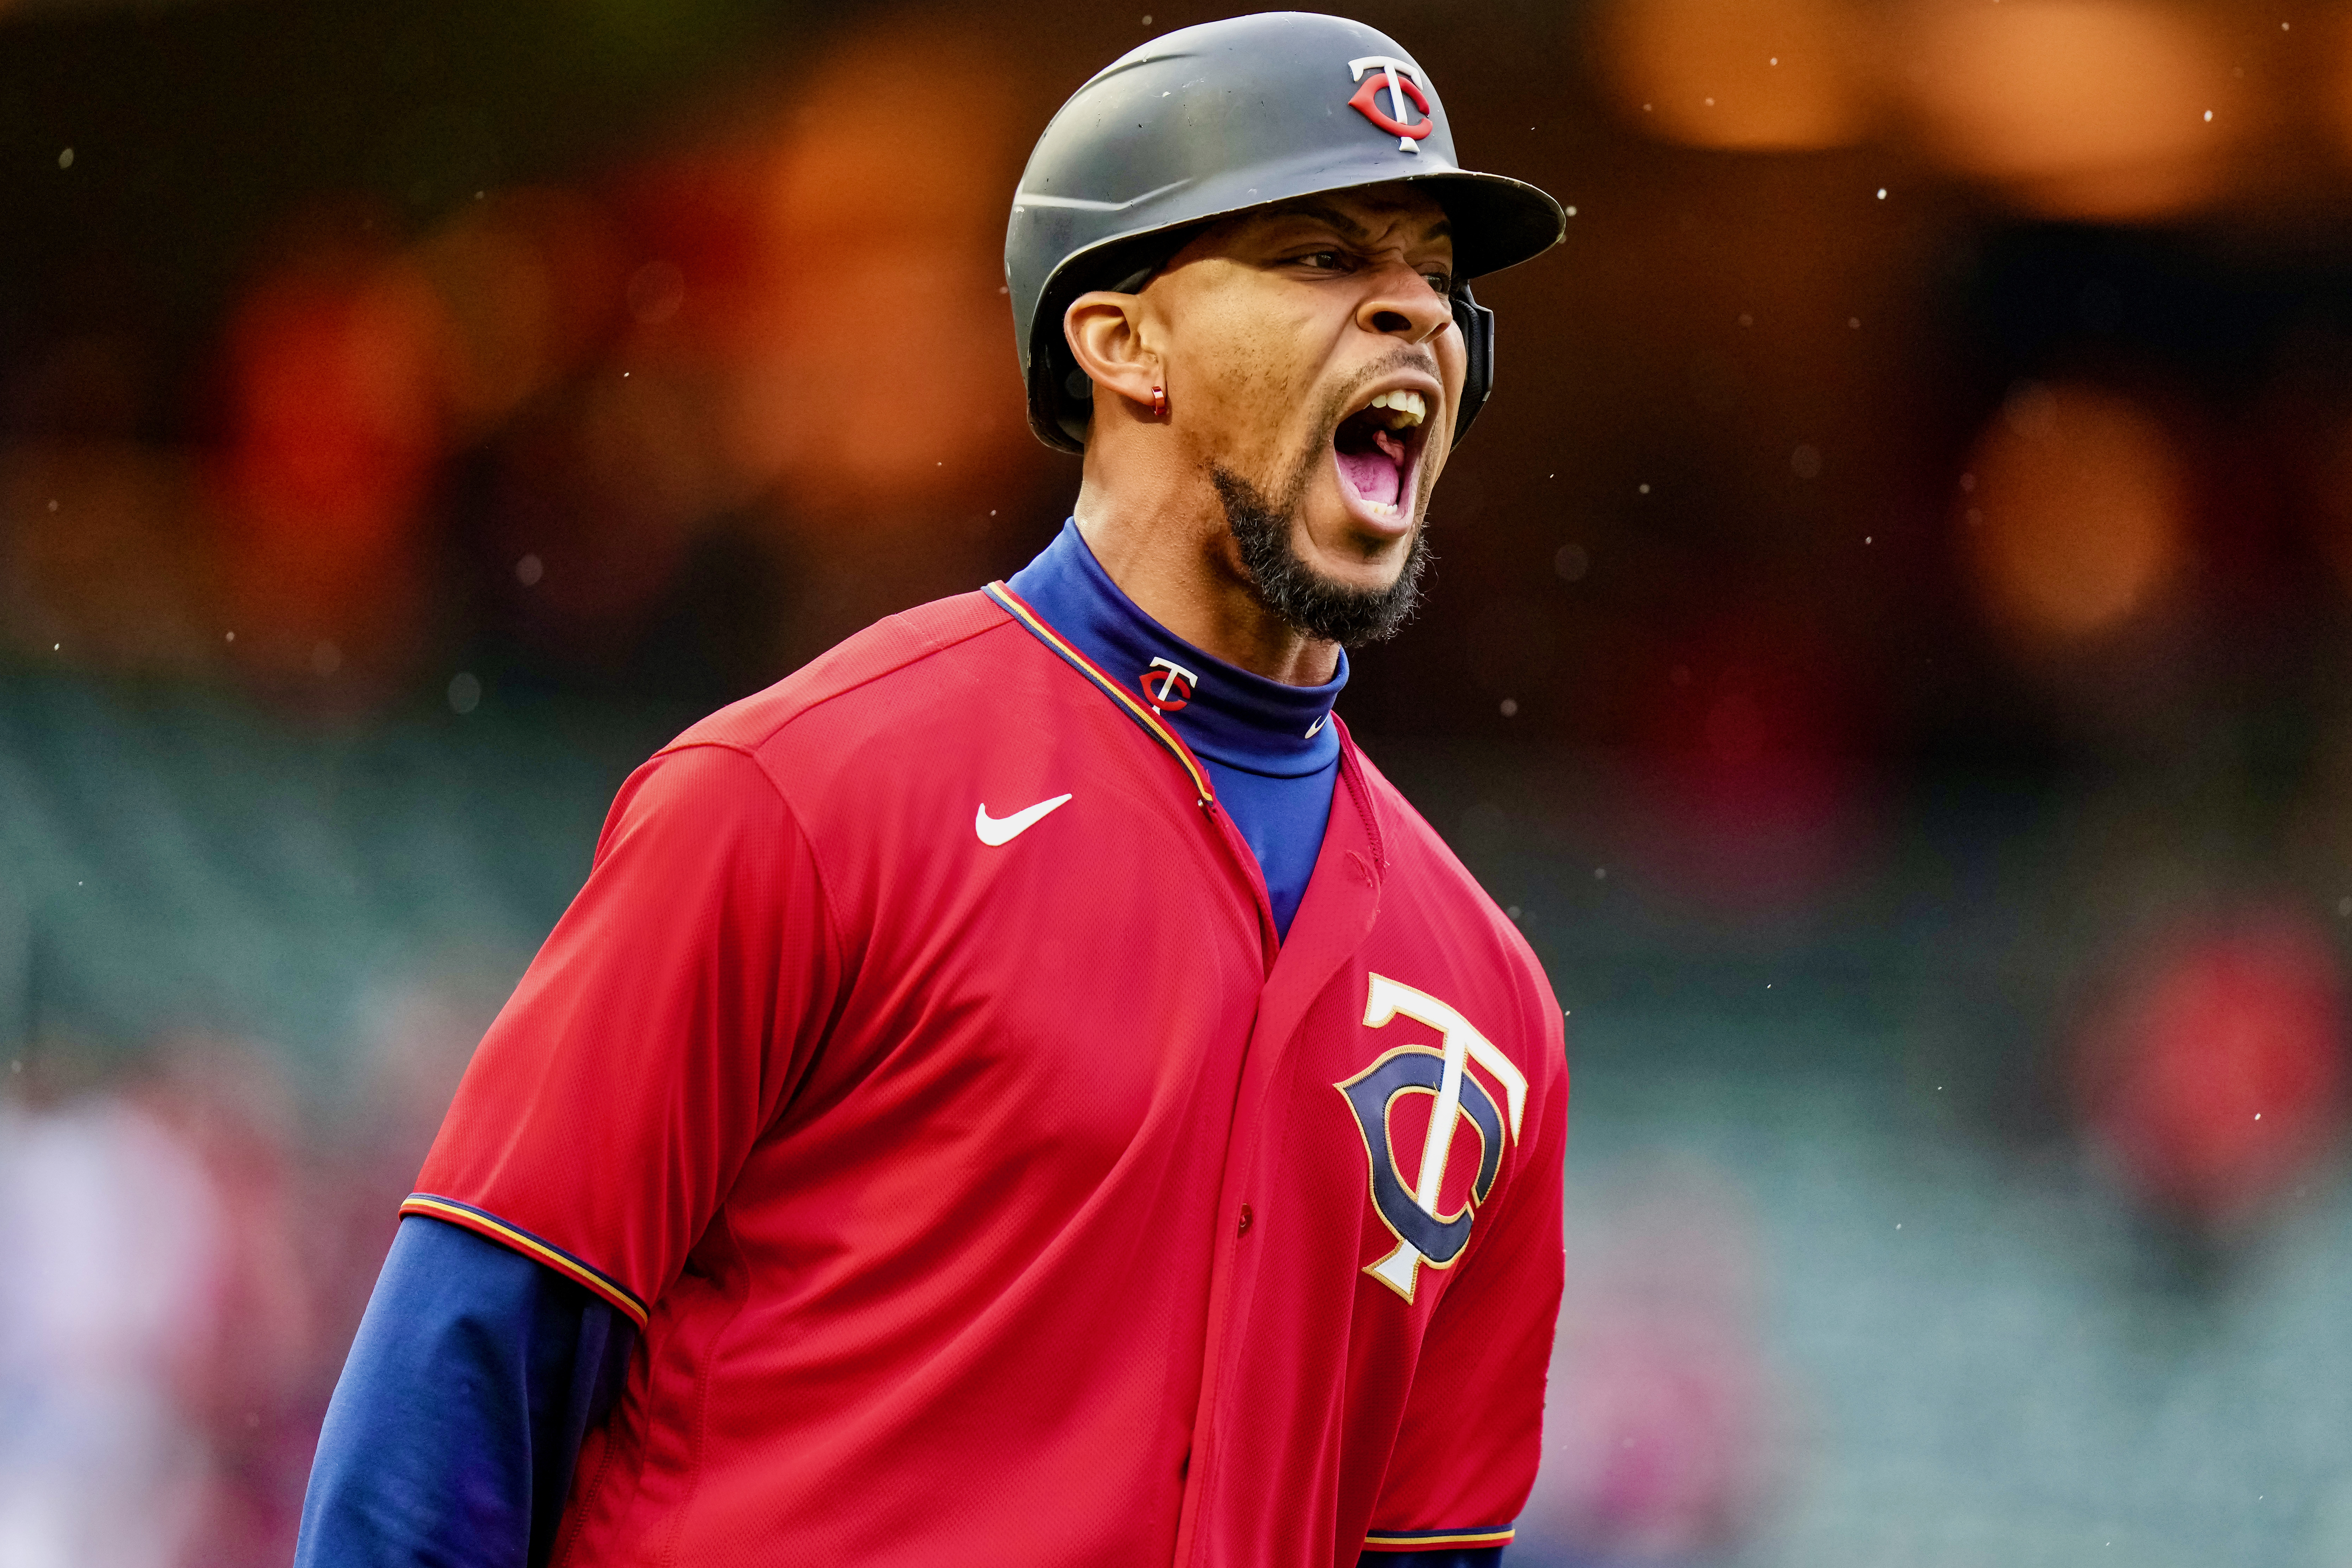 Byron Buxton very hyped after Signing his 7 year, $100 Million